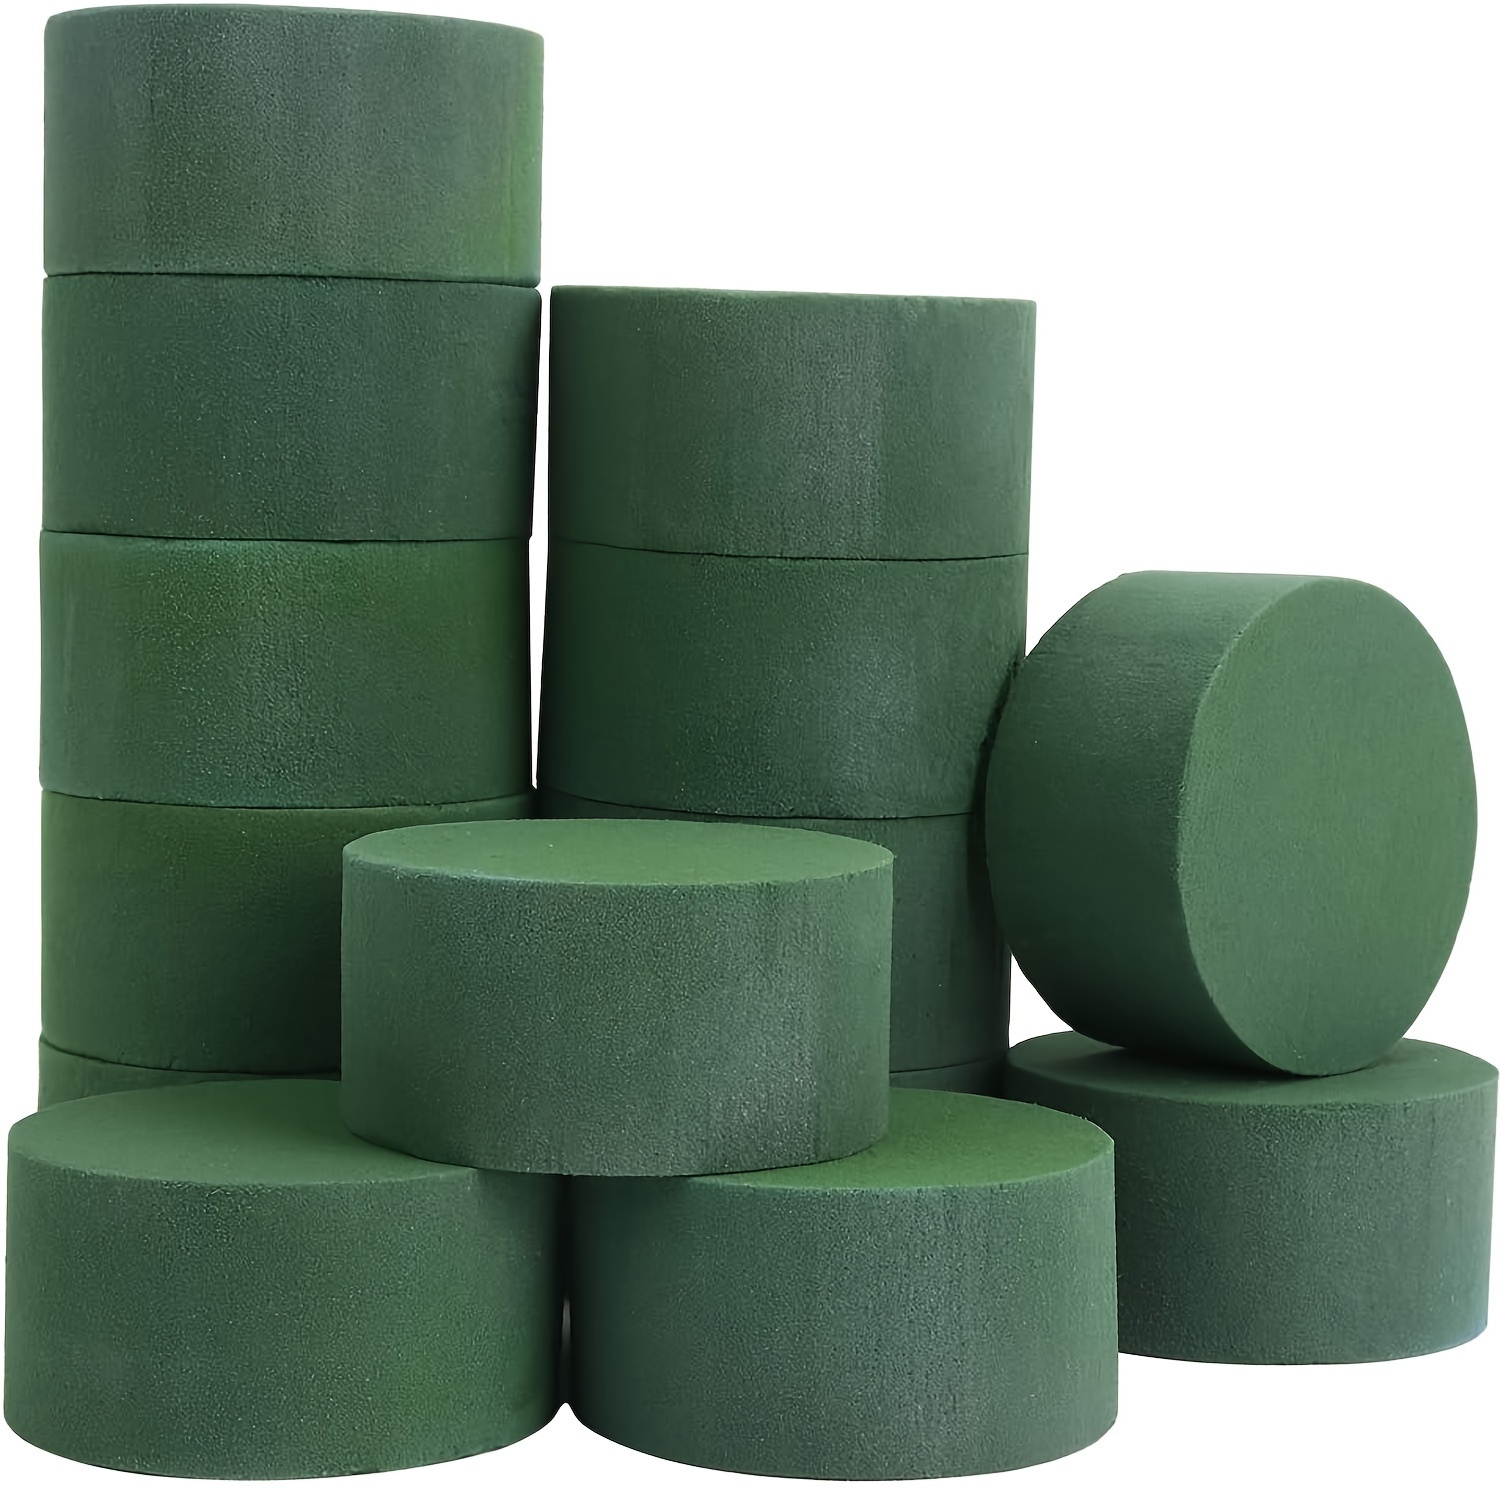  12Pcs Round Floral Foam Blocks, Wet and Dry Foam Bricks for  Fresh and Artificial Flowers, Perfect for Wedding Decor, DIY Crafts, and  Party Decorations : Arts, Crafts & Sewing